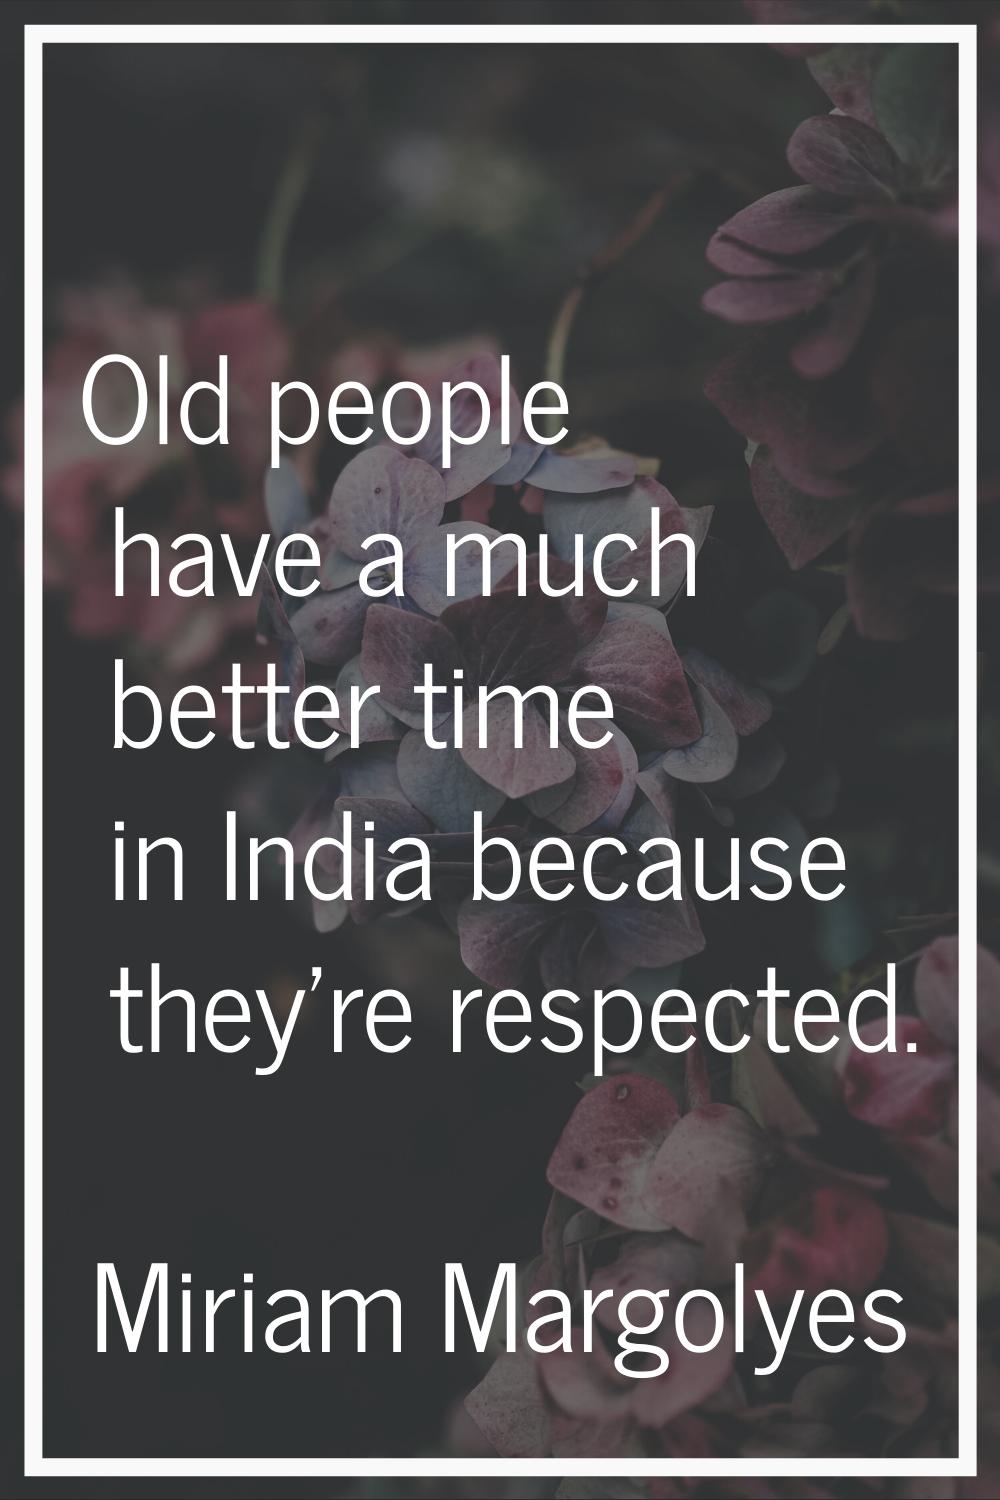 Old people have a much better time in India because they're respected.